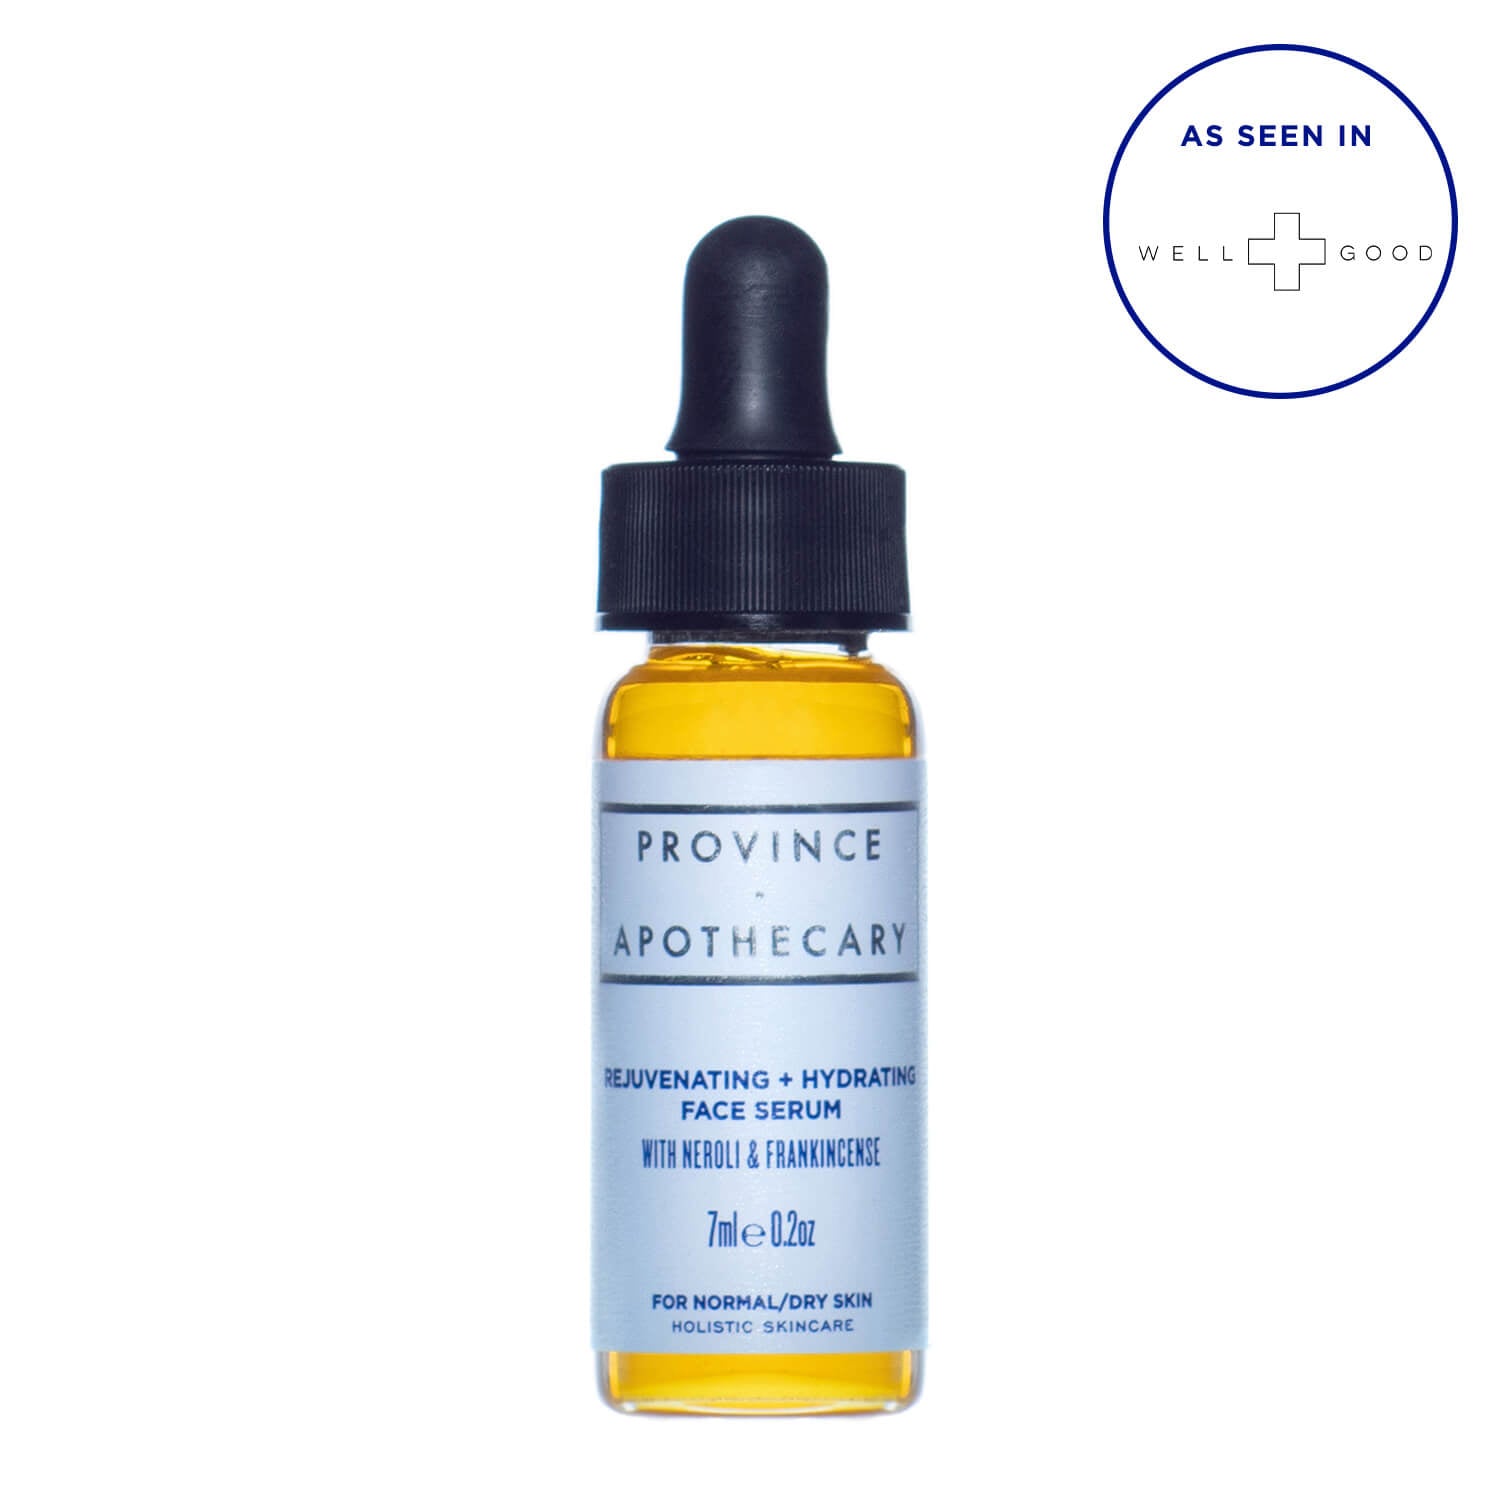 Province Apothecary Rejuvenating + Hydrating Face Serum 7ml